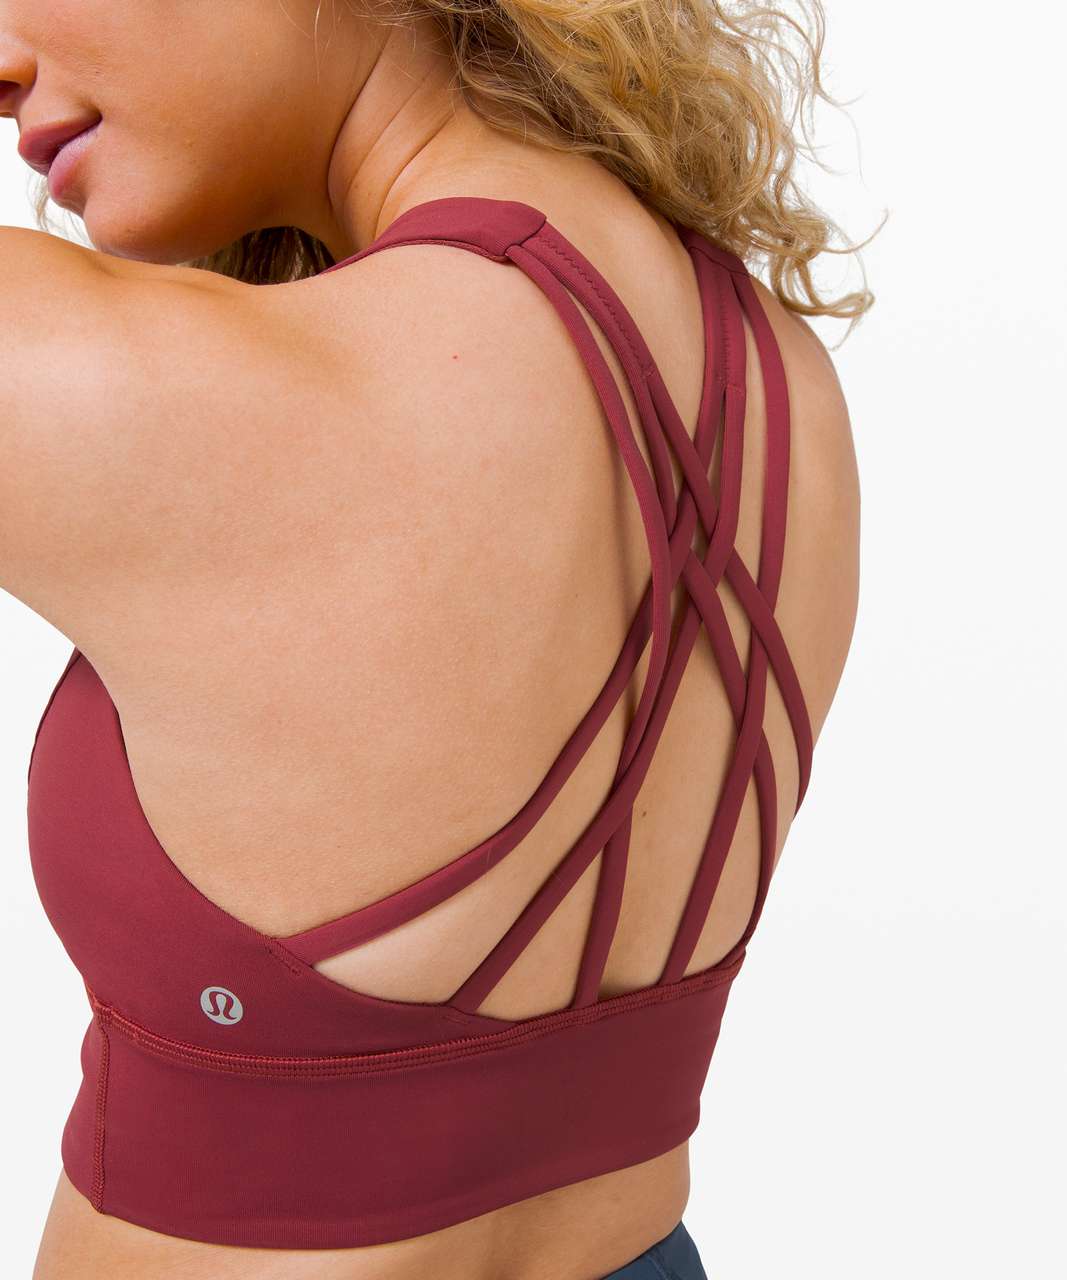 Lululemon Free To Be Serene Bra Long Line*Light Support, C/D Cup (Online Only) - Chianti